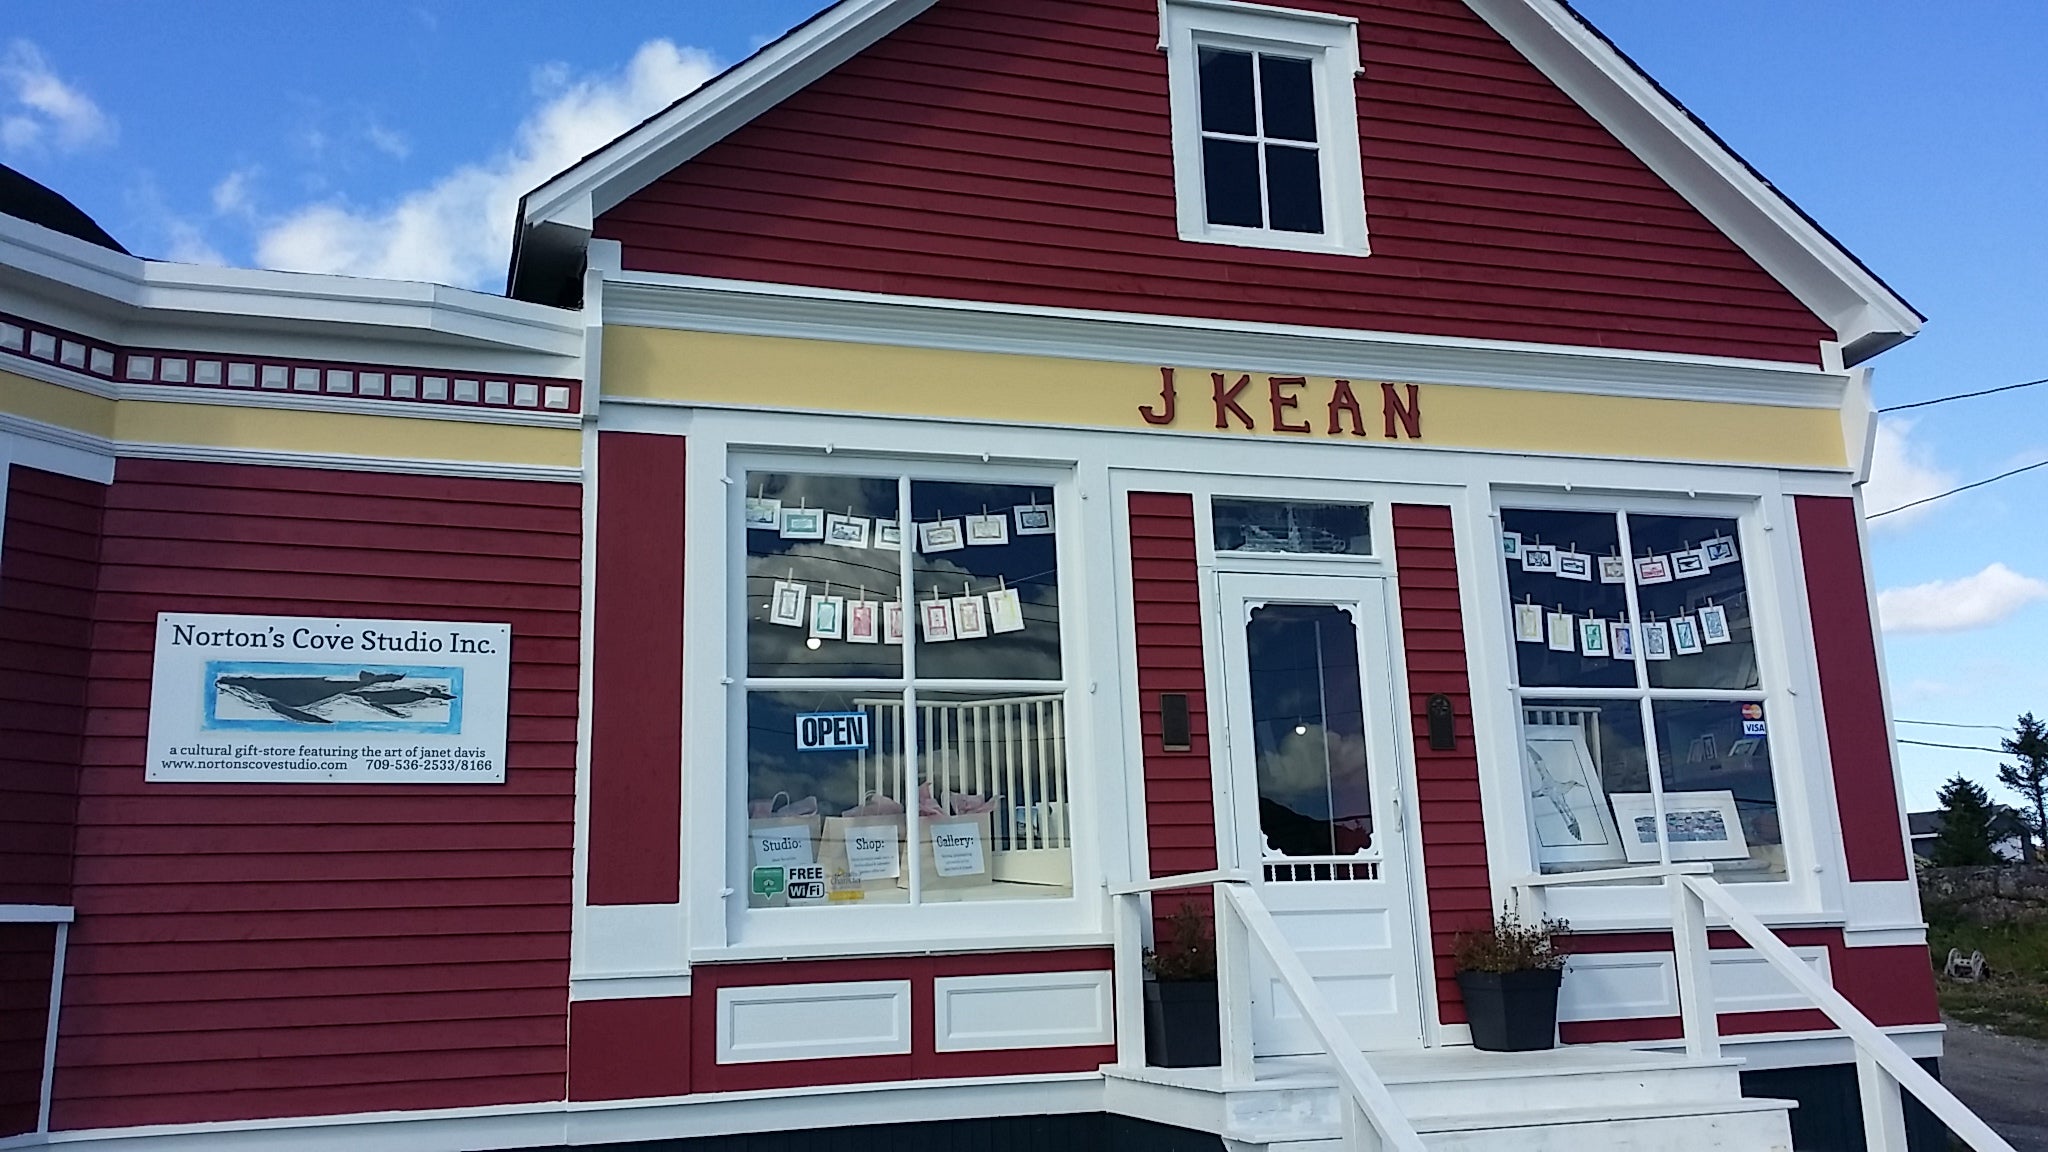 Heritage Structure Kean's General Store houses Norton's Cove Studio and the office of Norton's Cove Marine at 113 Main Street, New-Wes-Valley